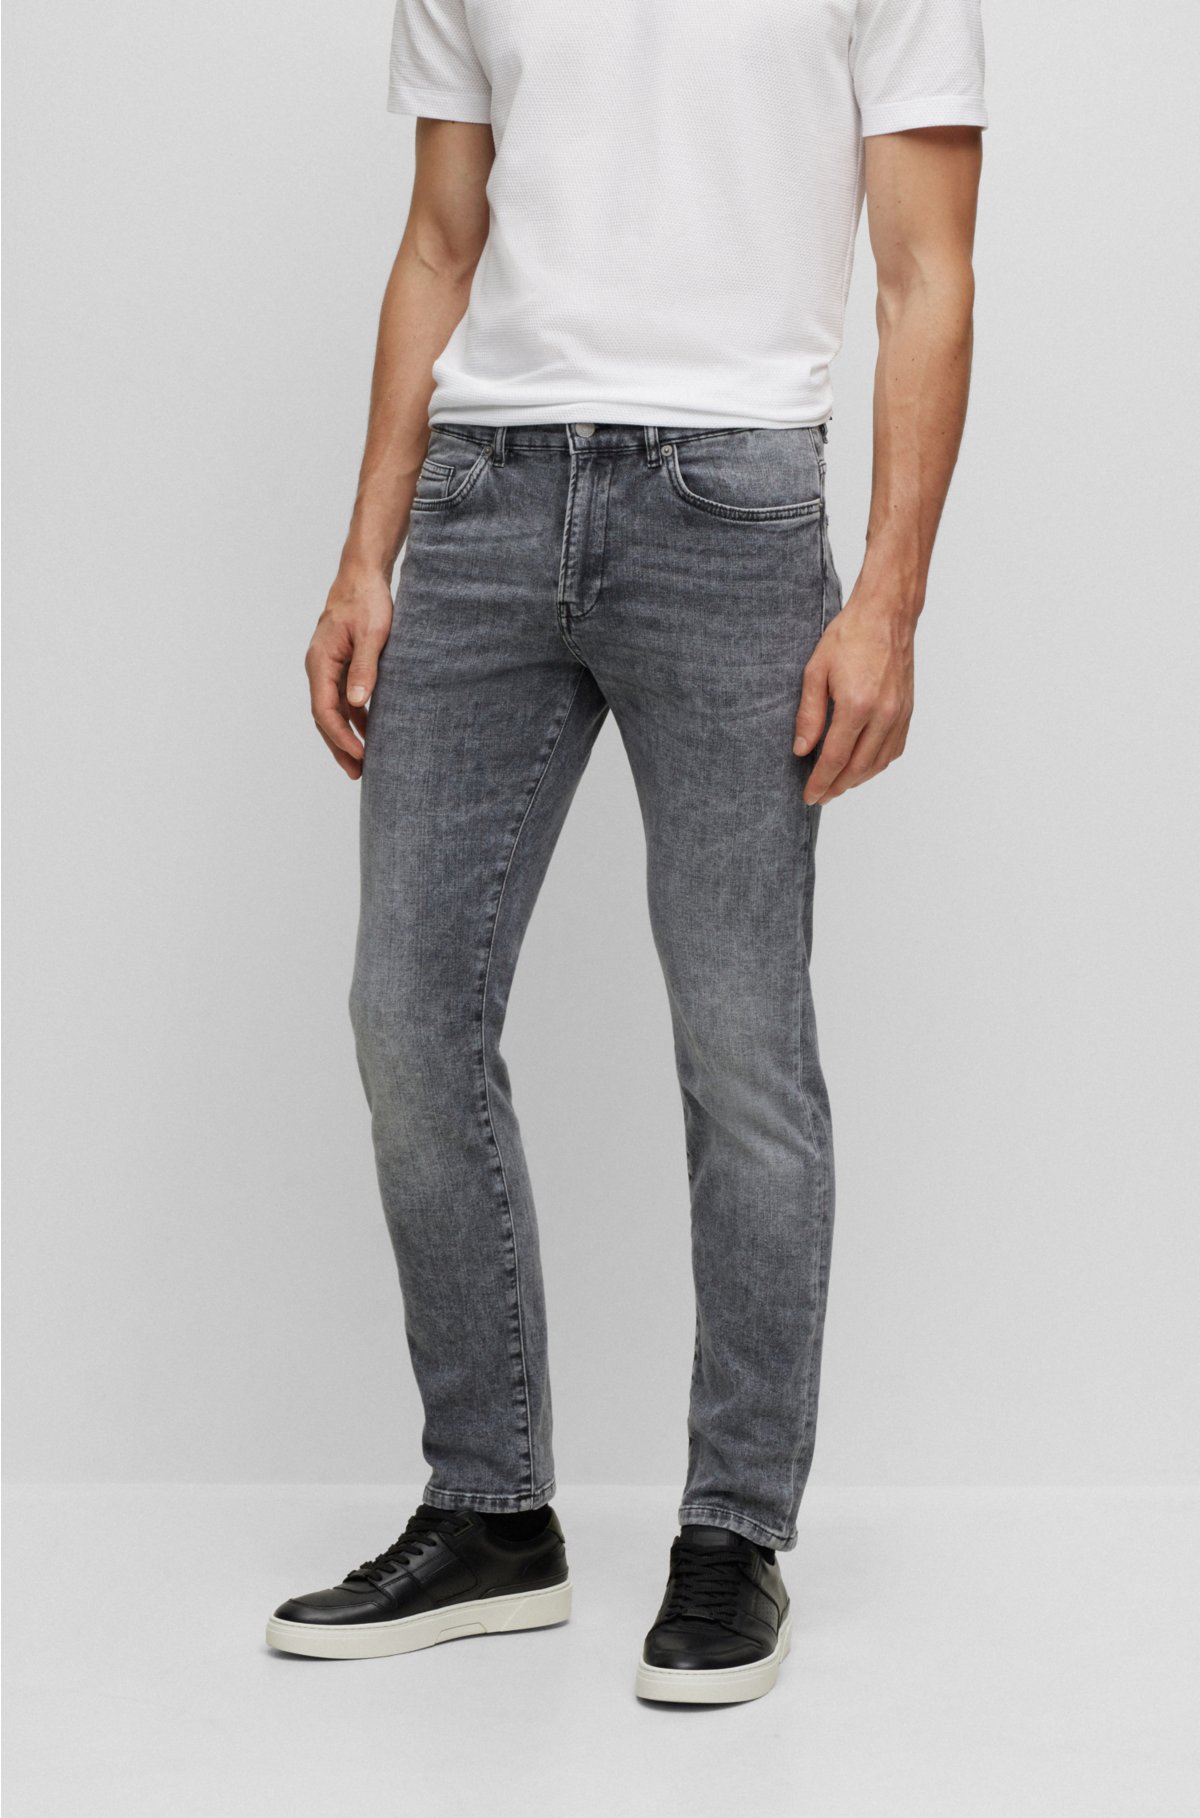 Stone Washed Grey Jeans